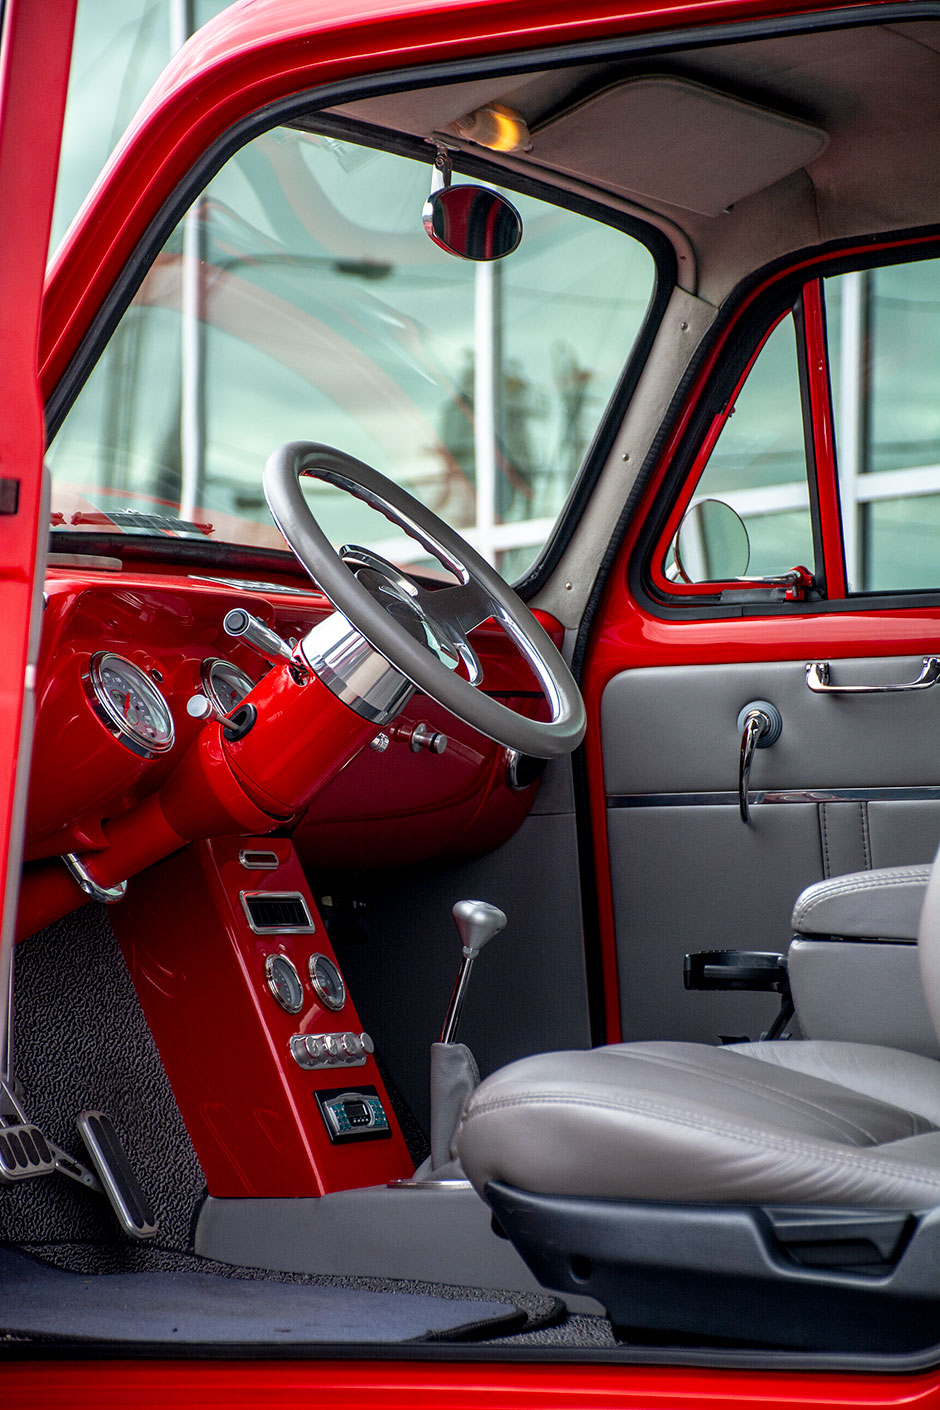 Interior of the collector classic, 1959 Ford Anglia